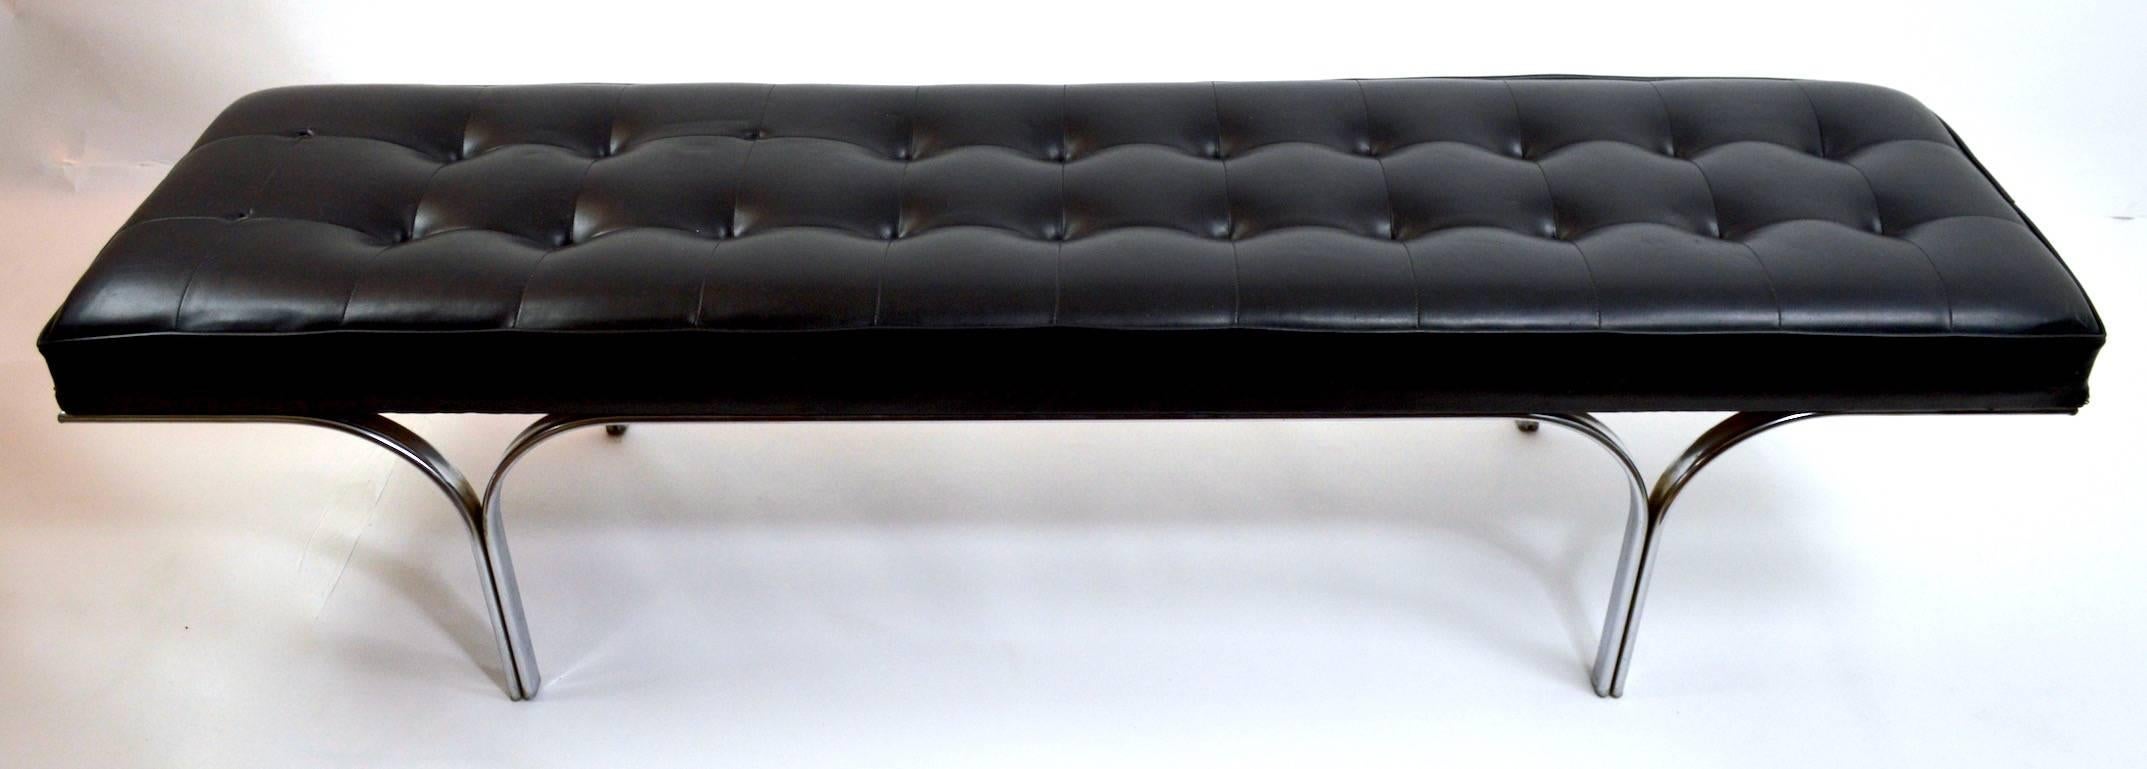 Stylish chrome leg upholstered top bench. The vinyl top shows wear, usable as is or reupholster to taste.